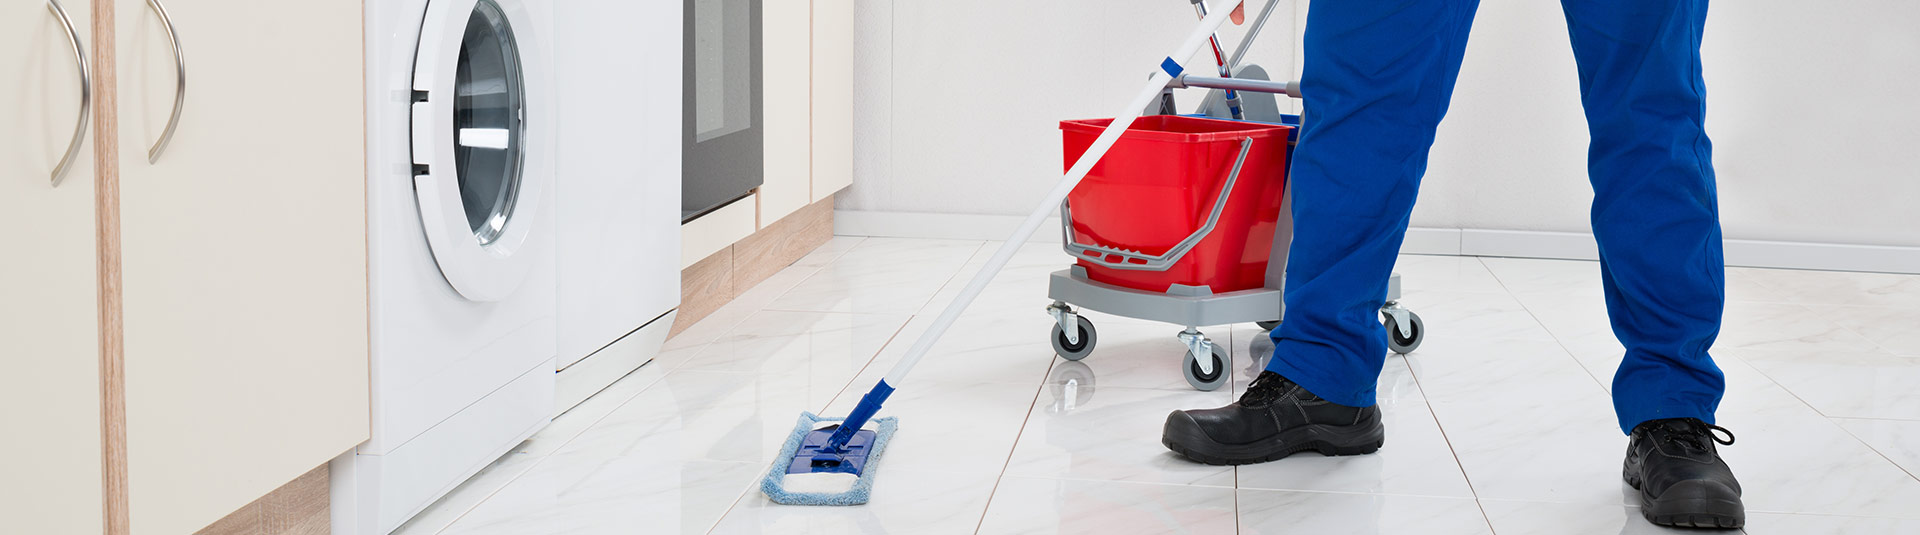 Cleaning Service Franchises